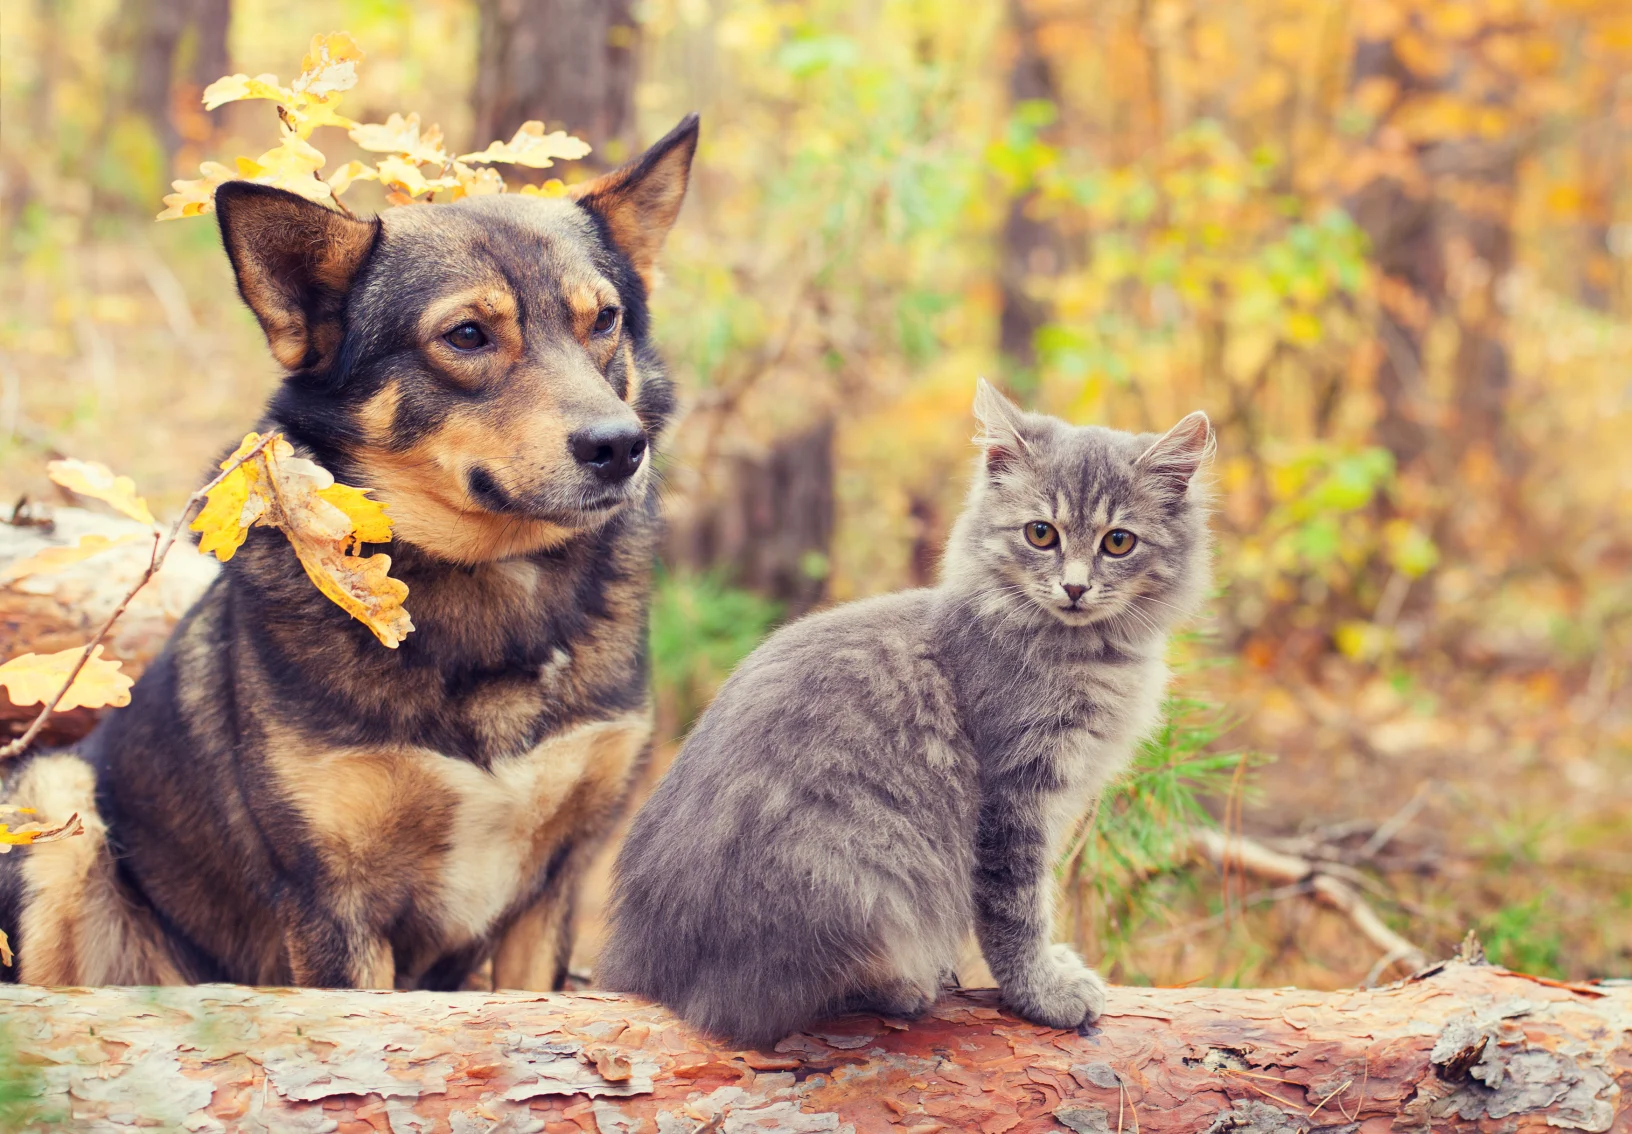 Dog and cat sitting in the forest on a log